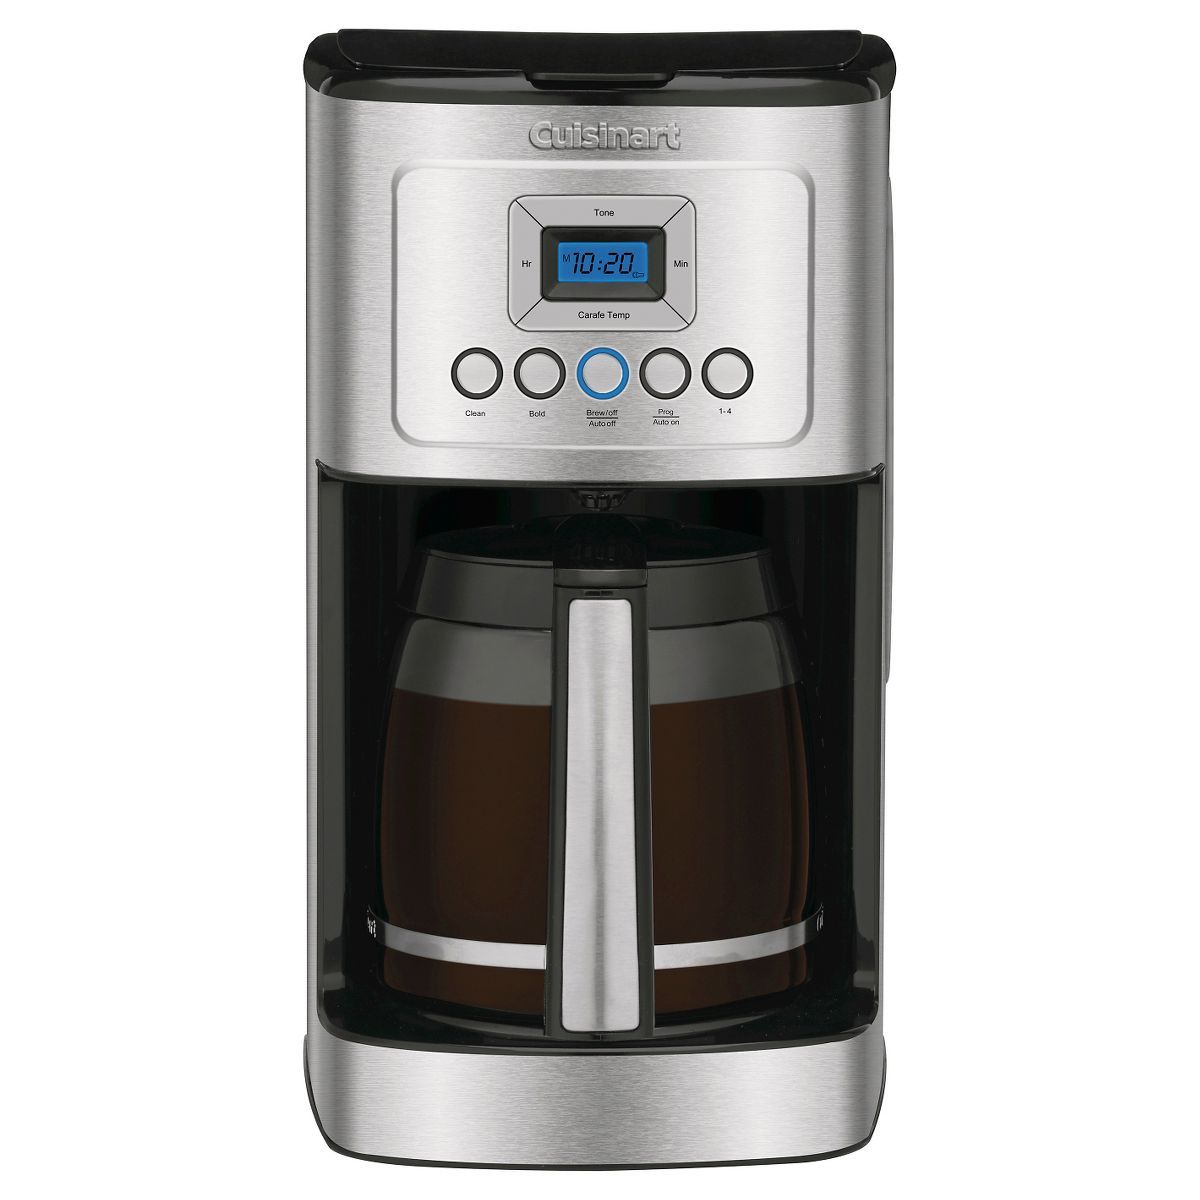 Cuisinart 14-Cup Programmable Coffeemaker - Stainless Steel - DCC-3200P1 | Target